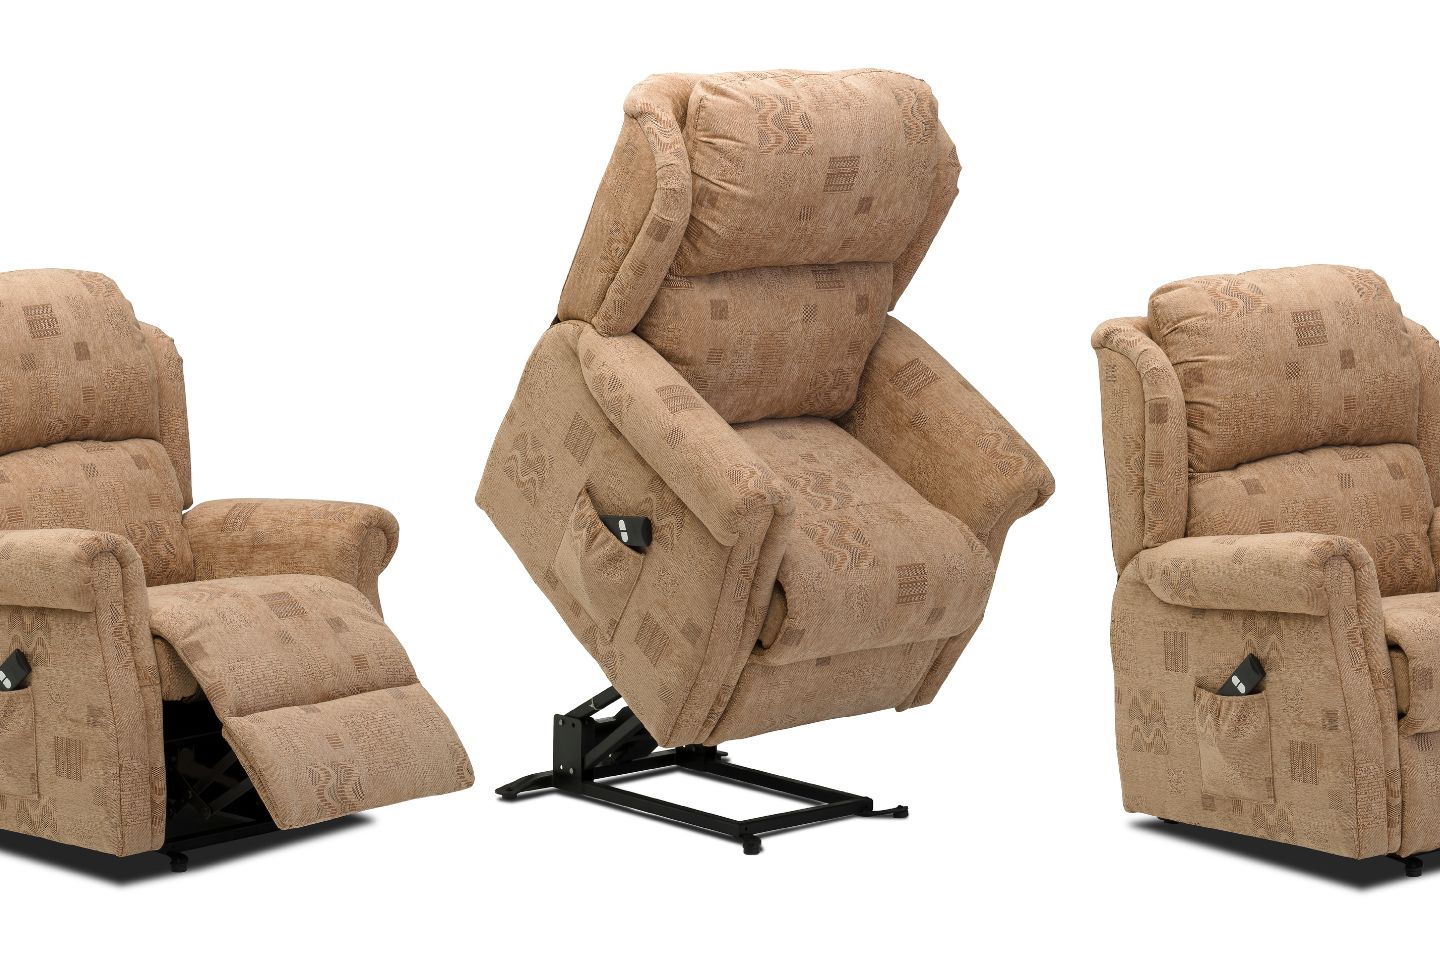 Evolur Harlow Deluxe Glider with Massager | Recliner | Rocker Charcoal